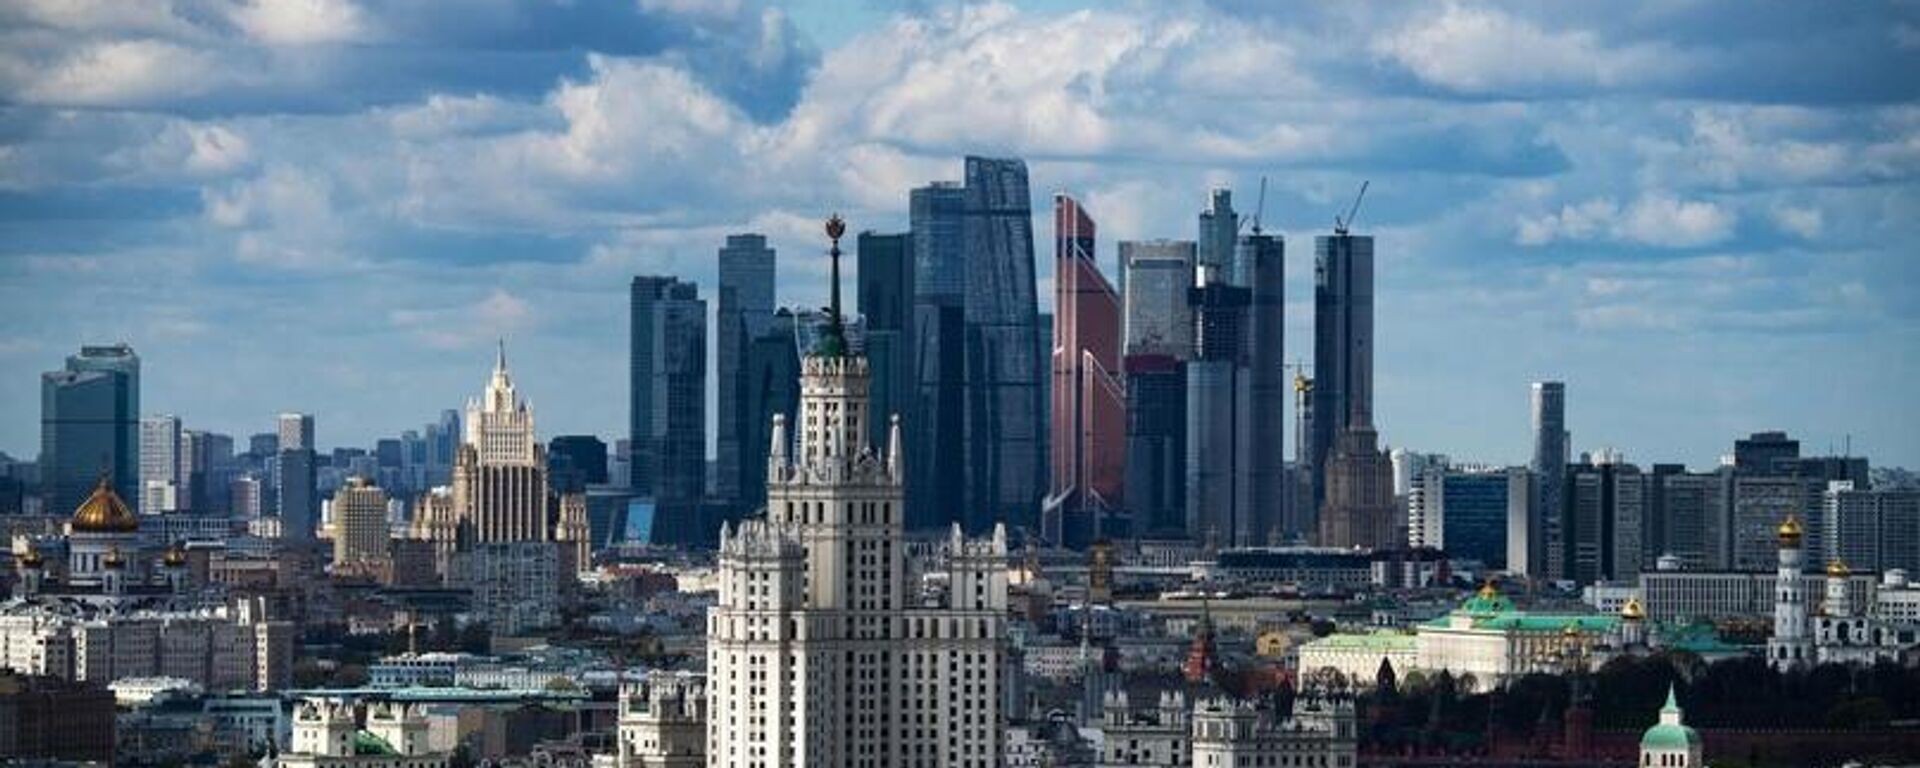 A general view shows the Soviet era skyscraper on Kotelnicheskaya Embankment of the Moskva river, Foreign ministry headquarters, Radisson Royal Hotel Moscow, the Christ the Savior cathedral and the Kremlin, with the Moscow International Business Centre, also known as Moskva-City, seen in te background, in Moscow, Russia - Sputnik International, 1920, 20.01.2023